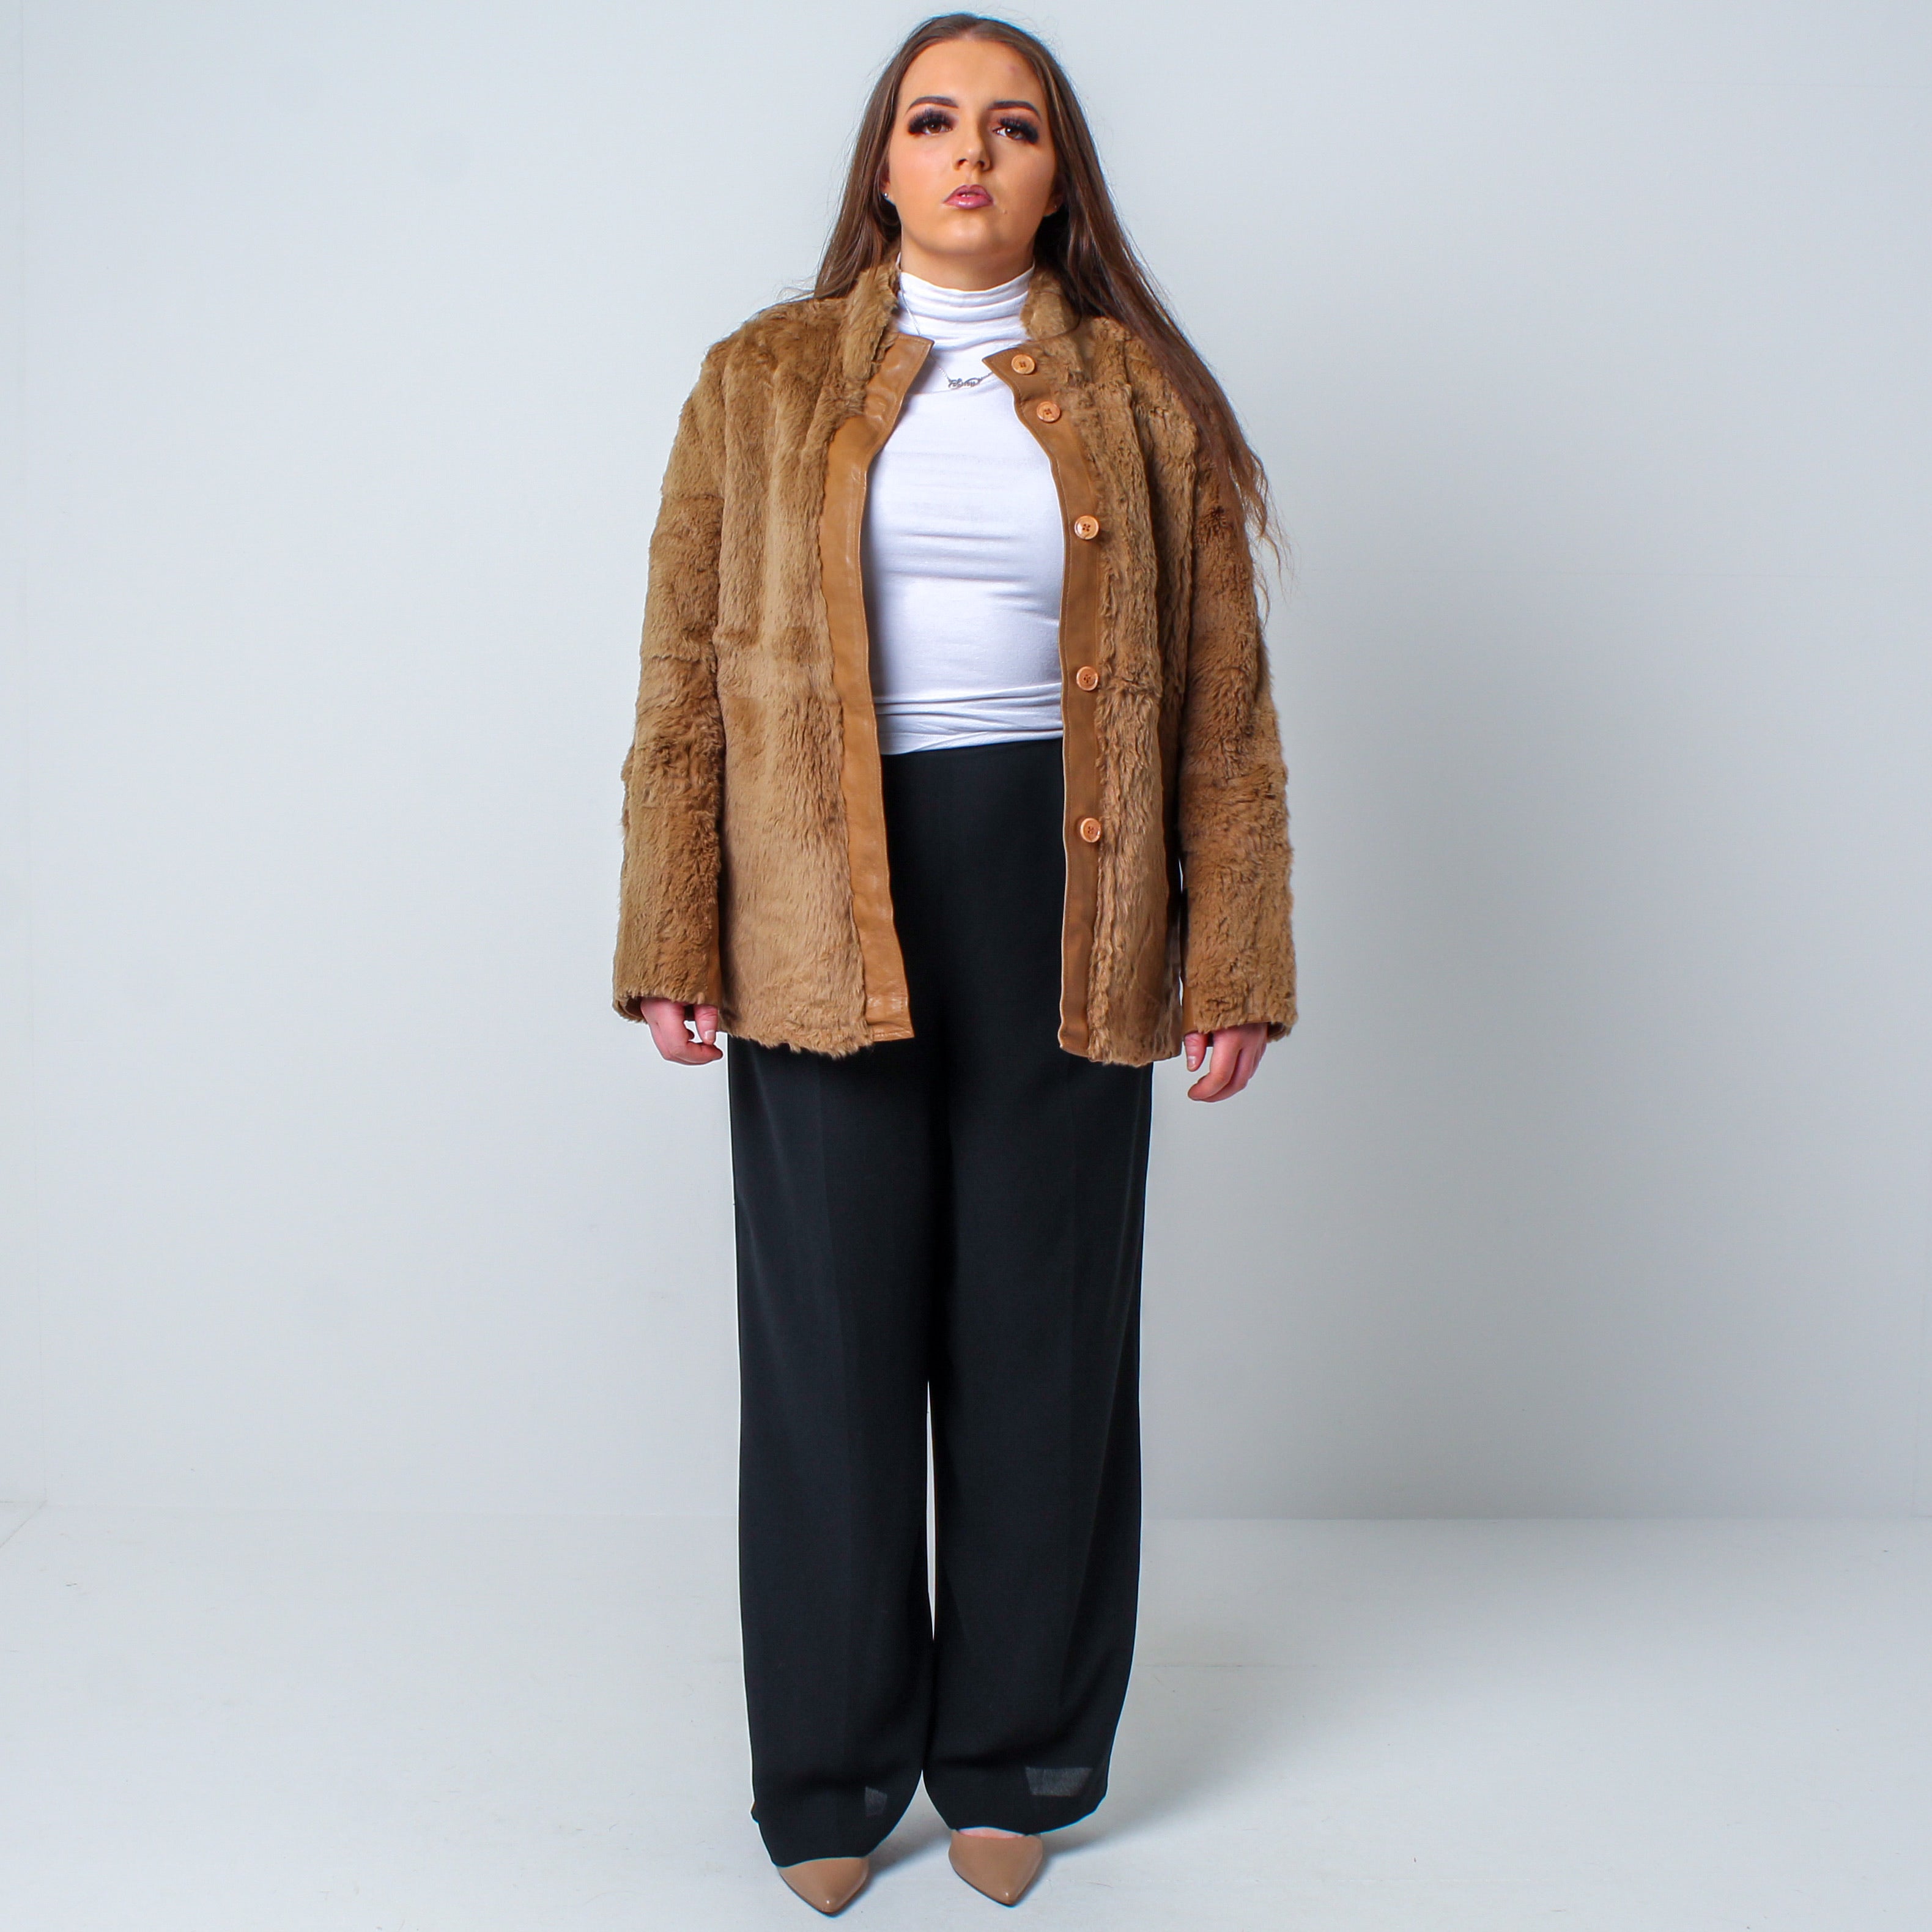 Women’s Vintage Real Rabbit Fur Coat With Leather Linings UK 12-16